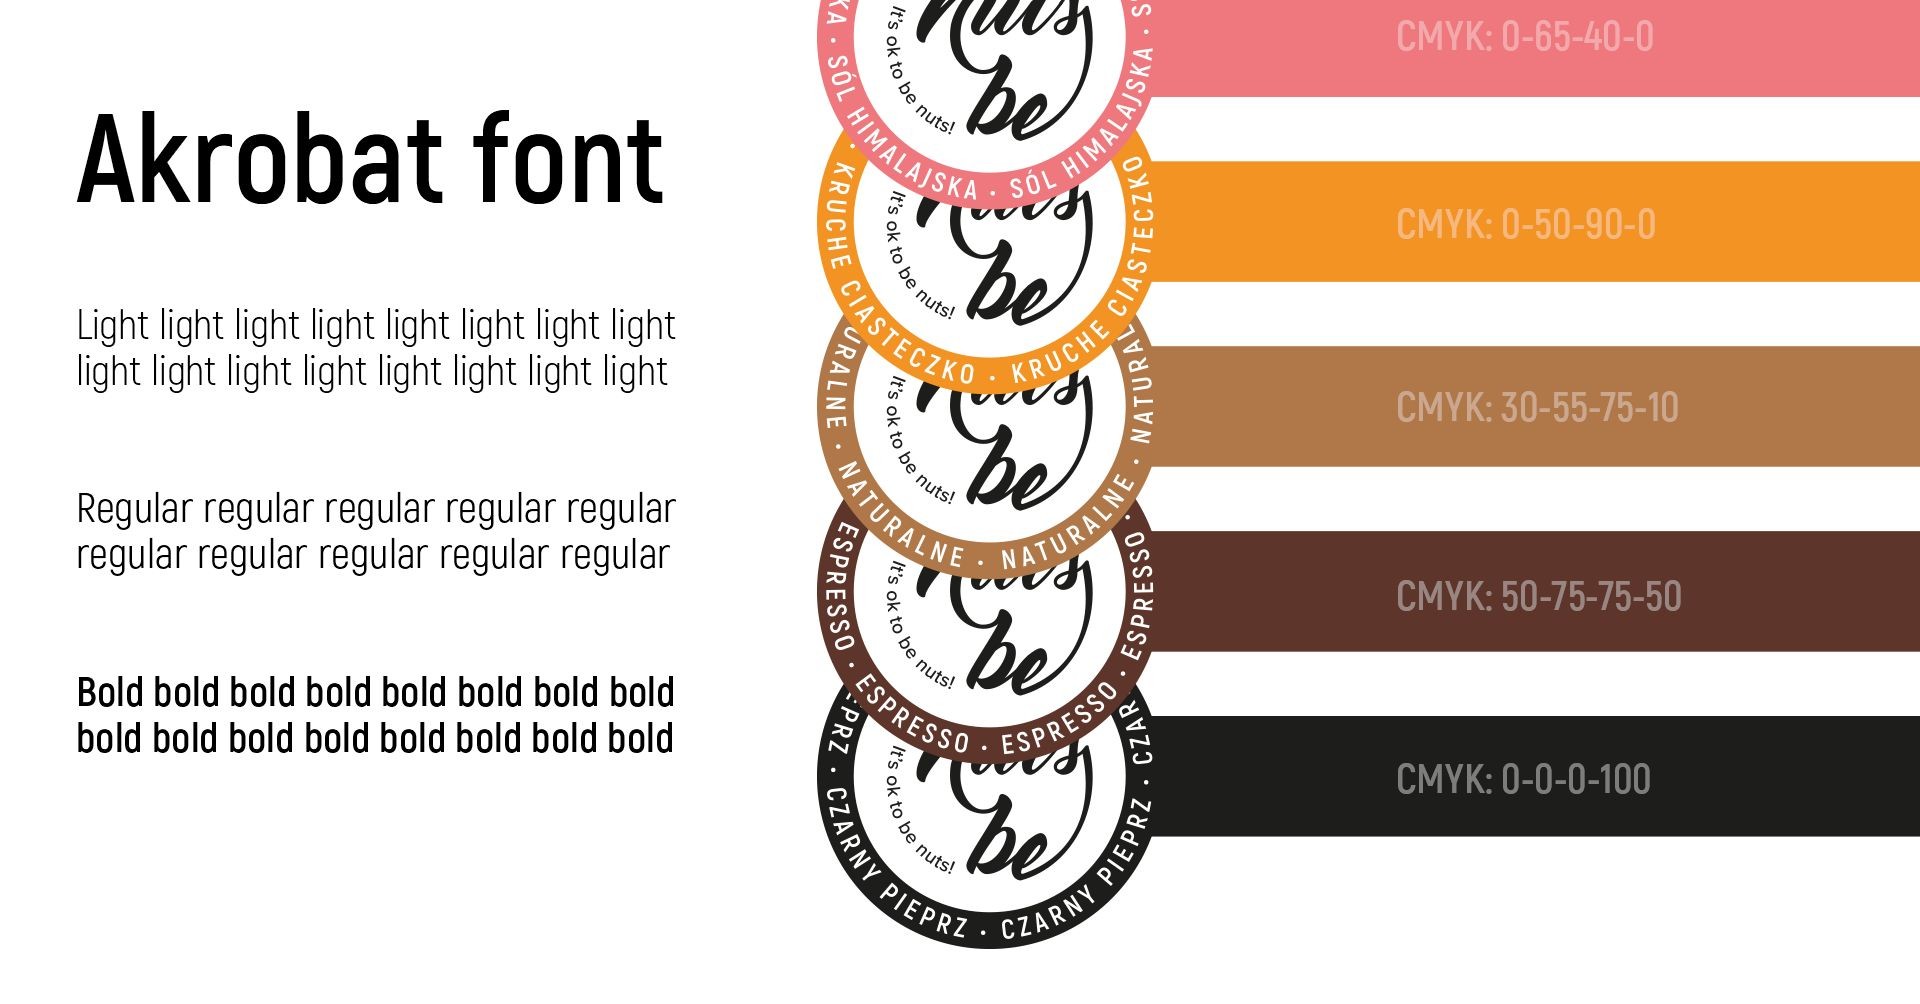 Font and colors proposal